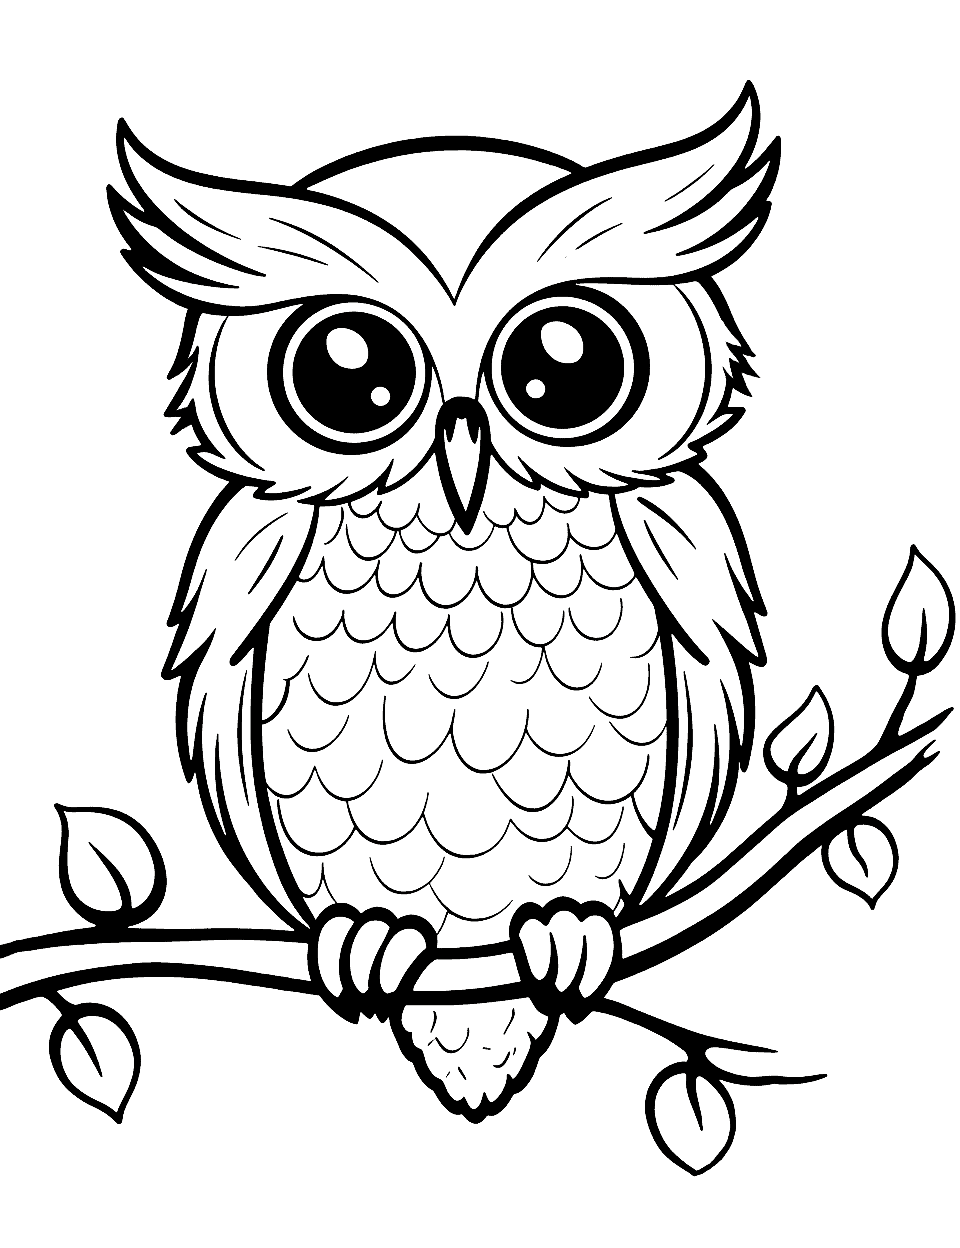 Wise Owl Animal Coloring Page - An owl perched on a tree branch with a wise and knowledgeable expression.